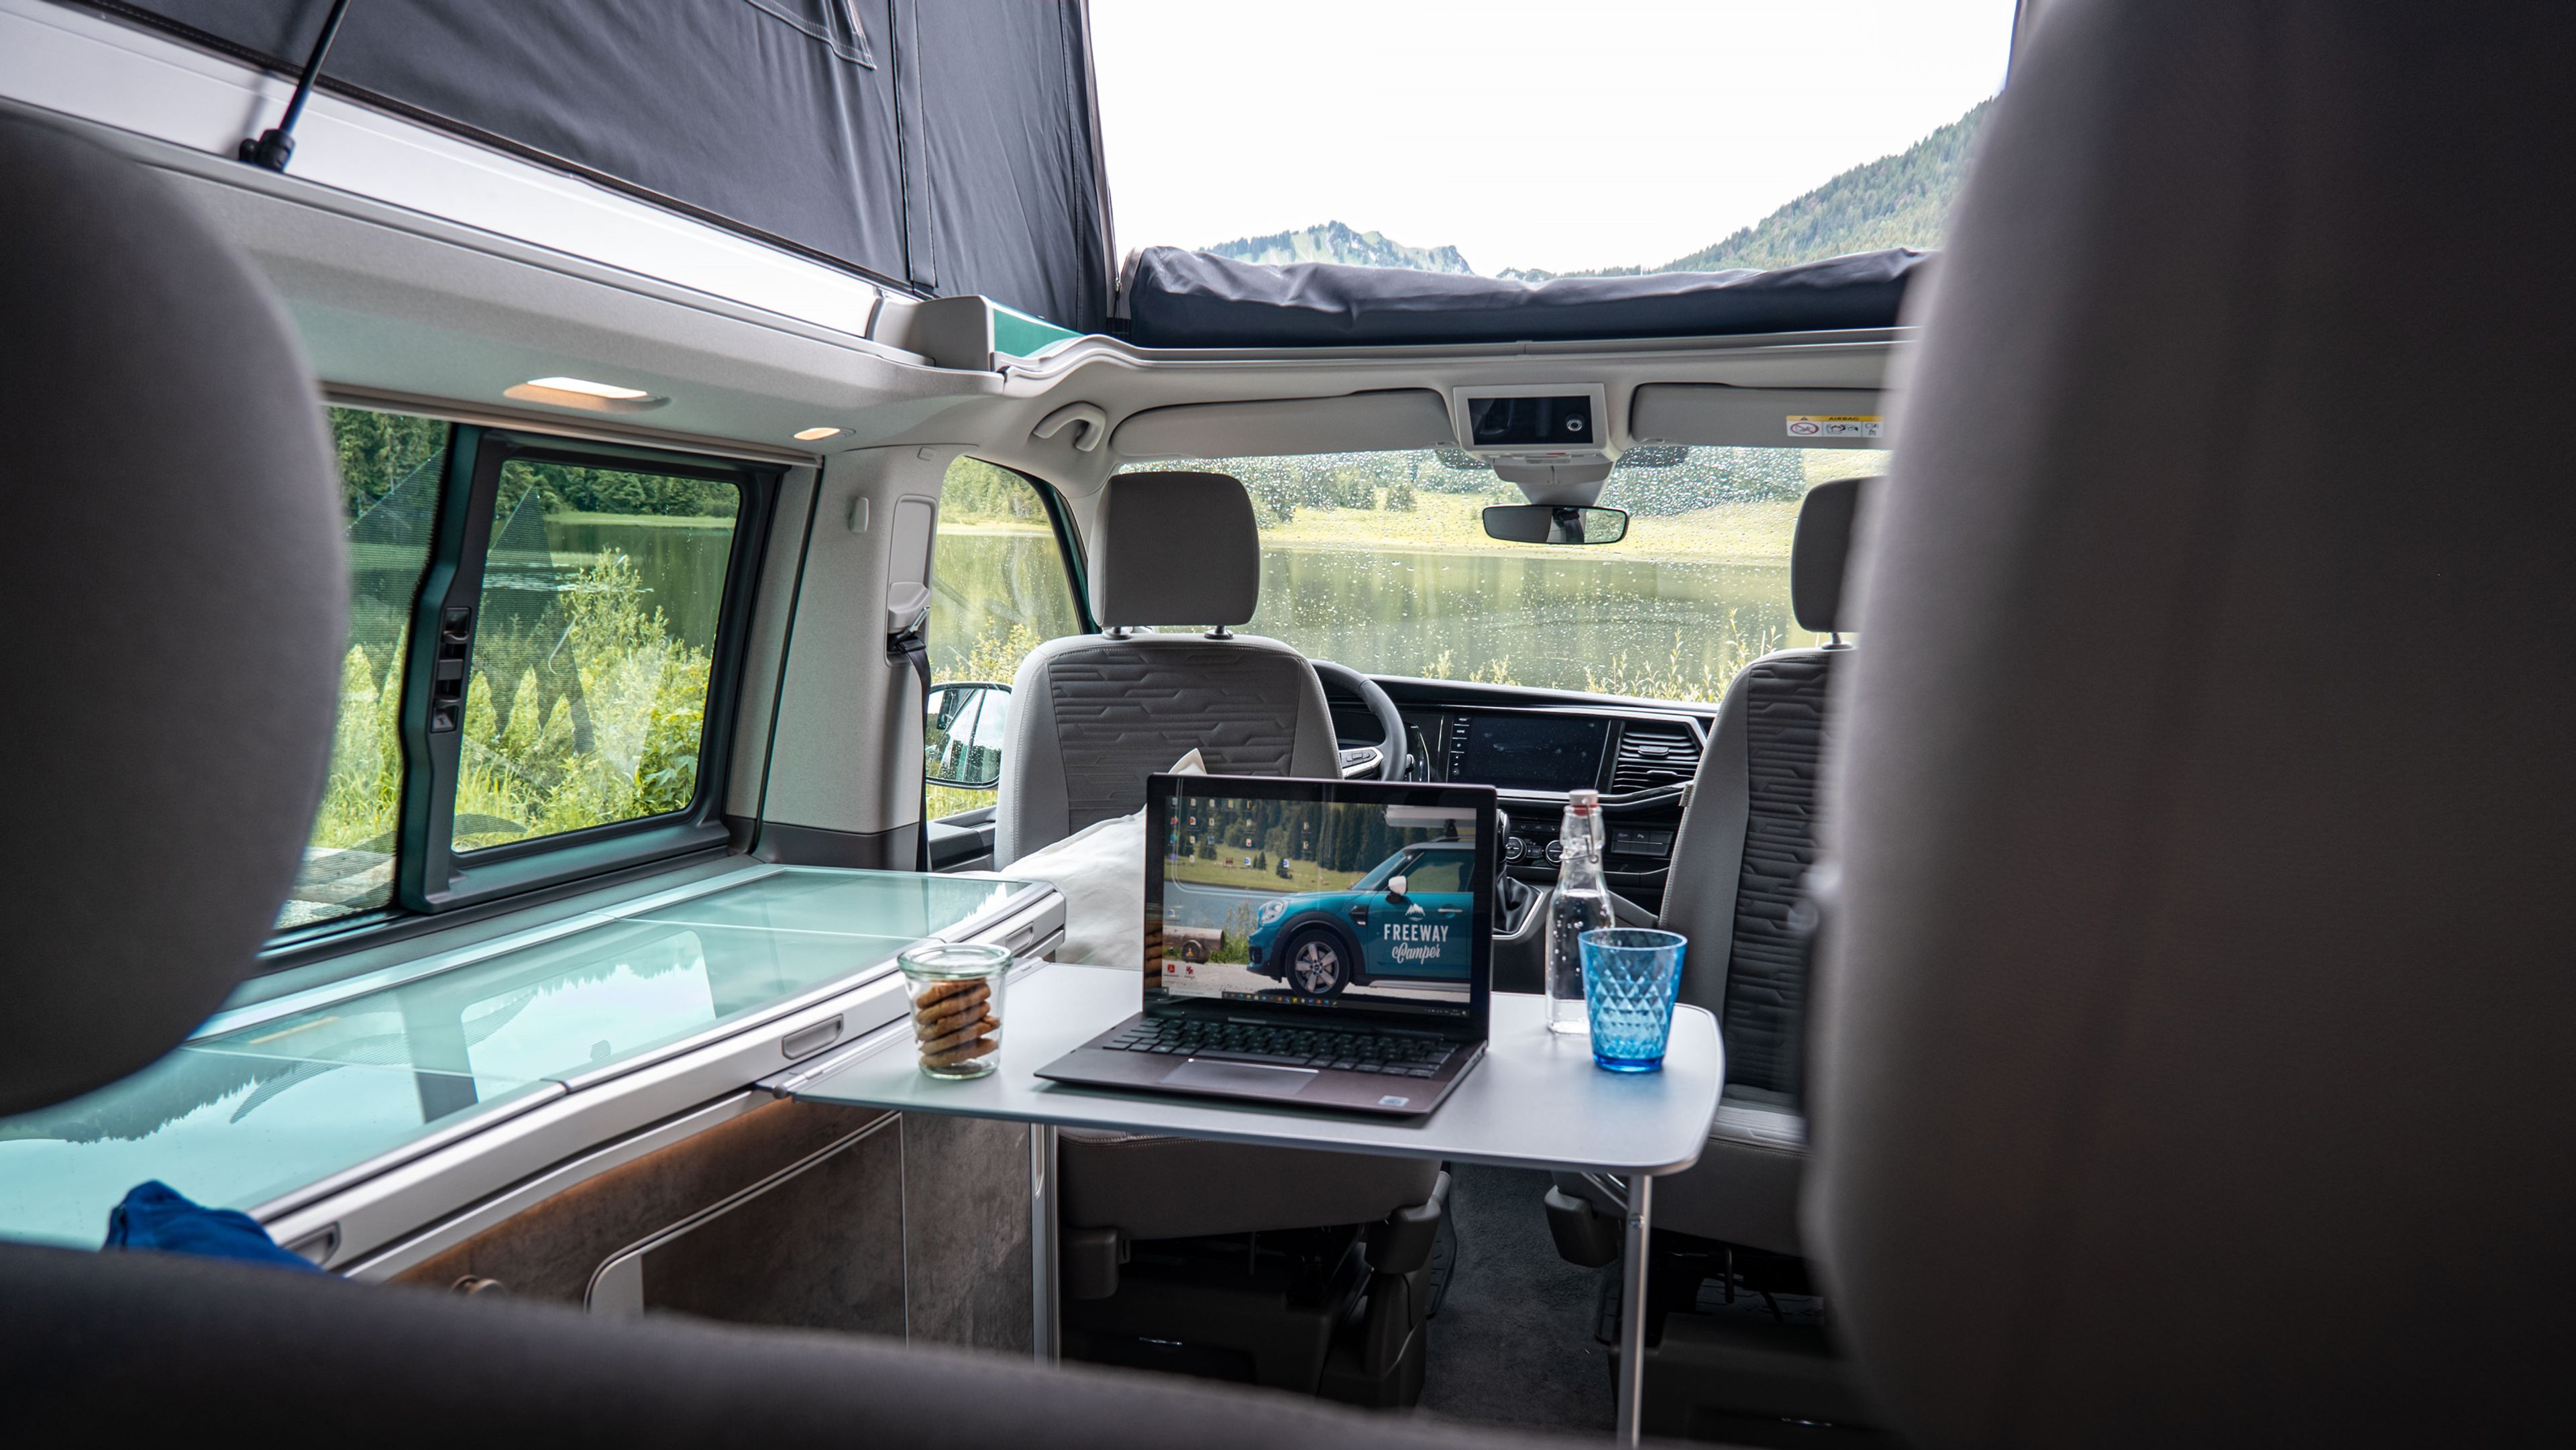 Mobile Office - Your workplace in the camper